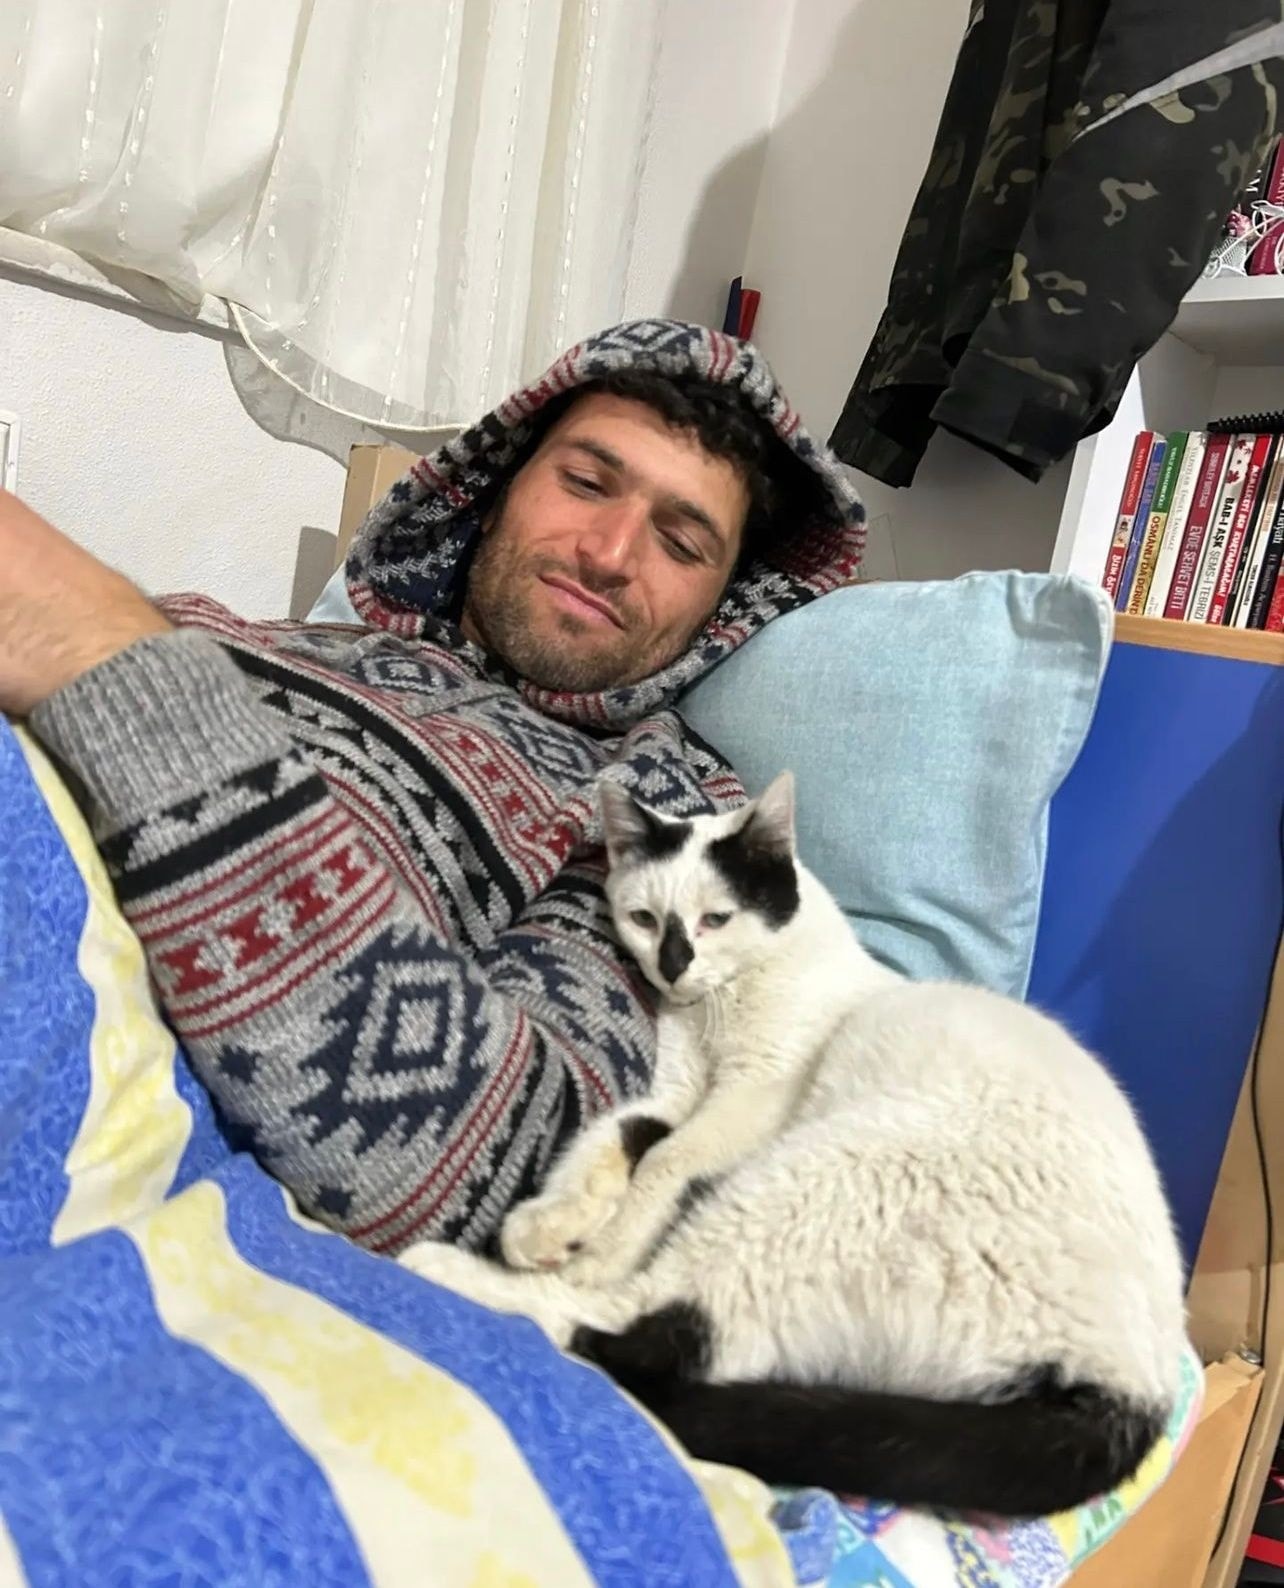 May be an image of 1 person, cat and indoor